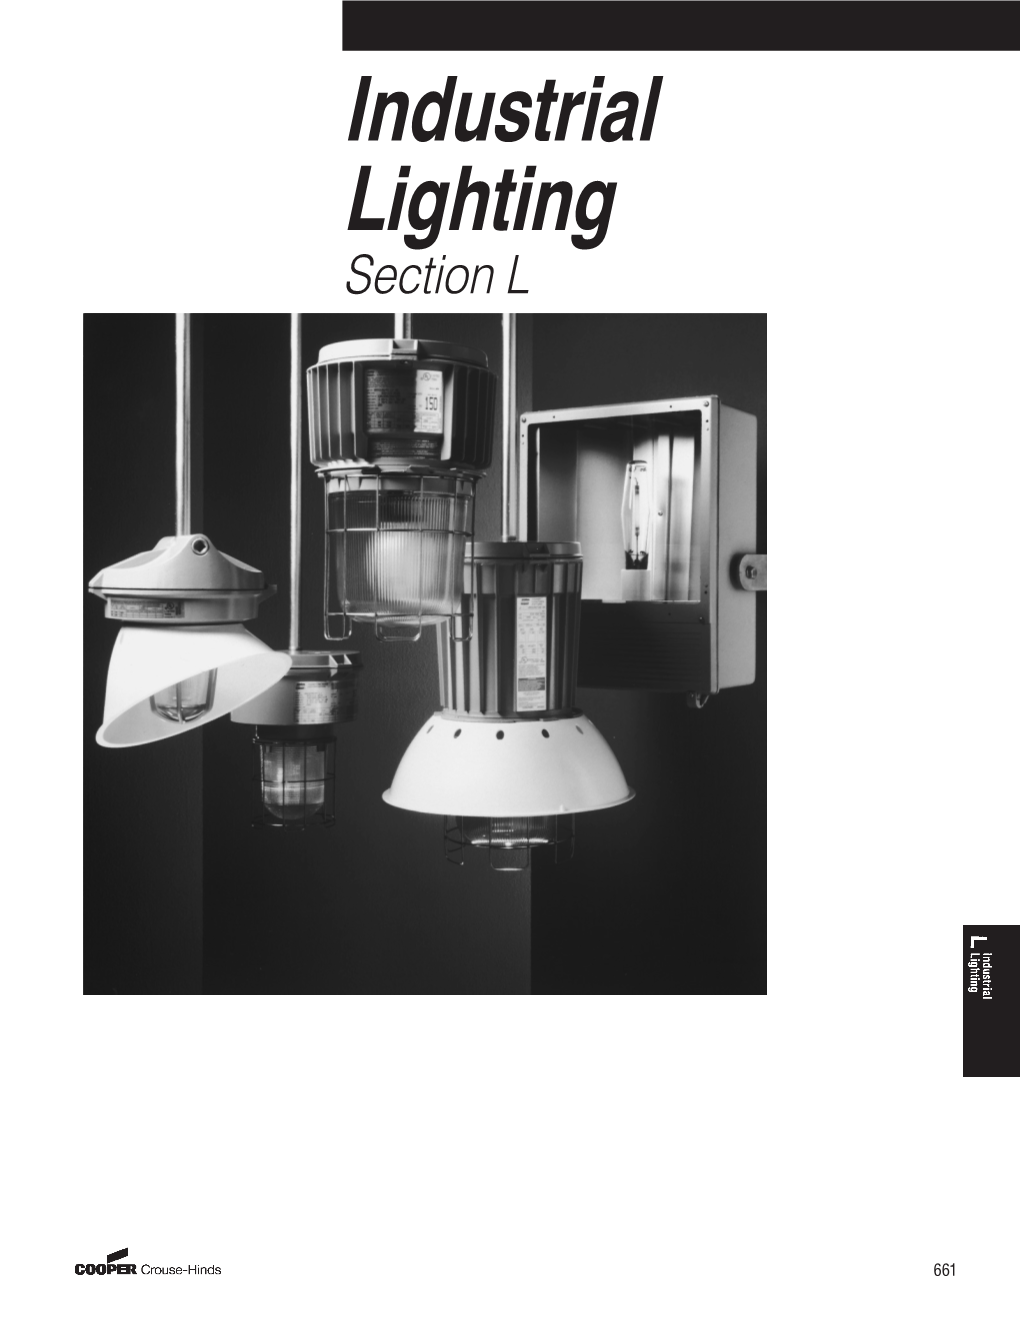 Industrial Lighting Section L